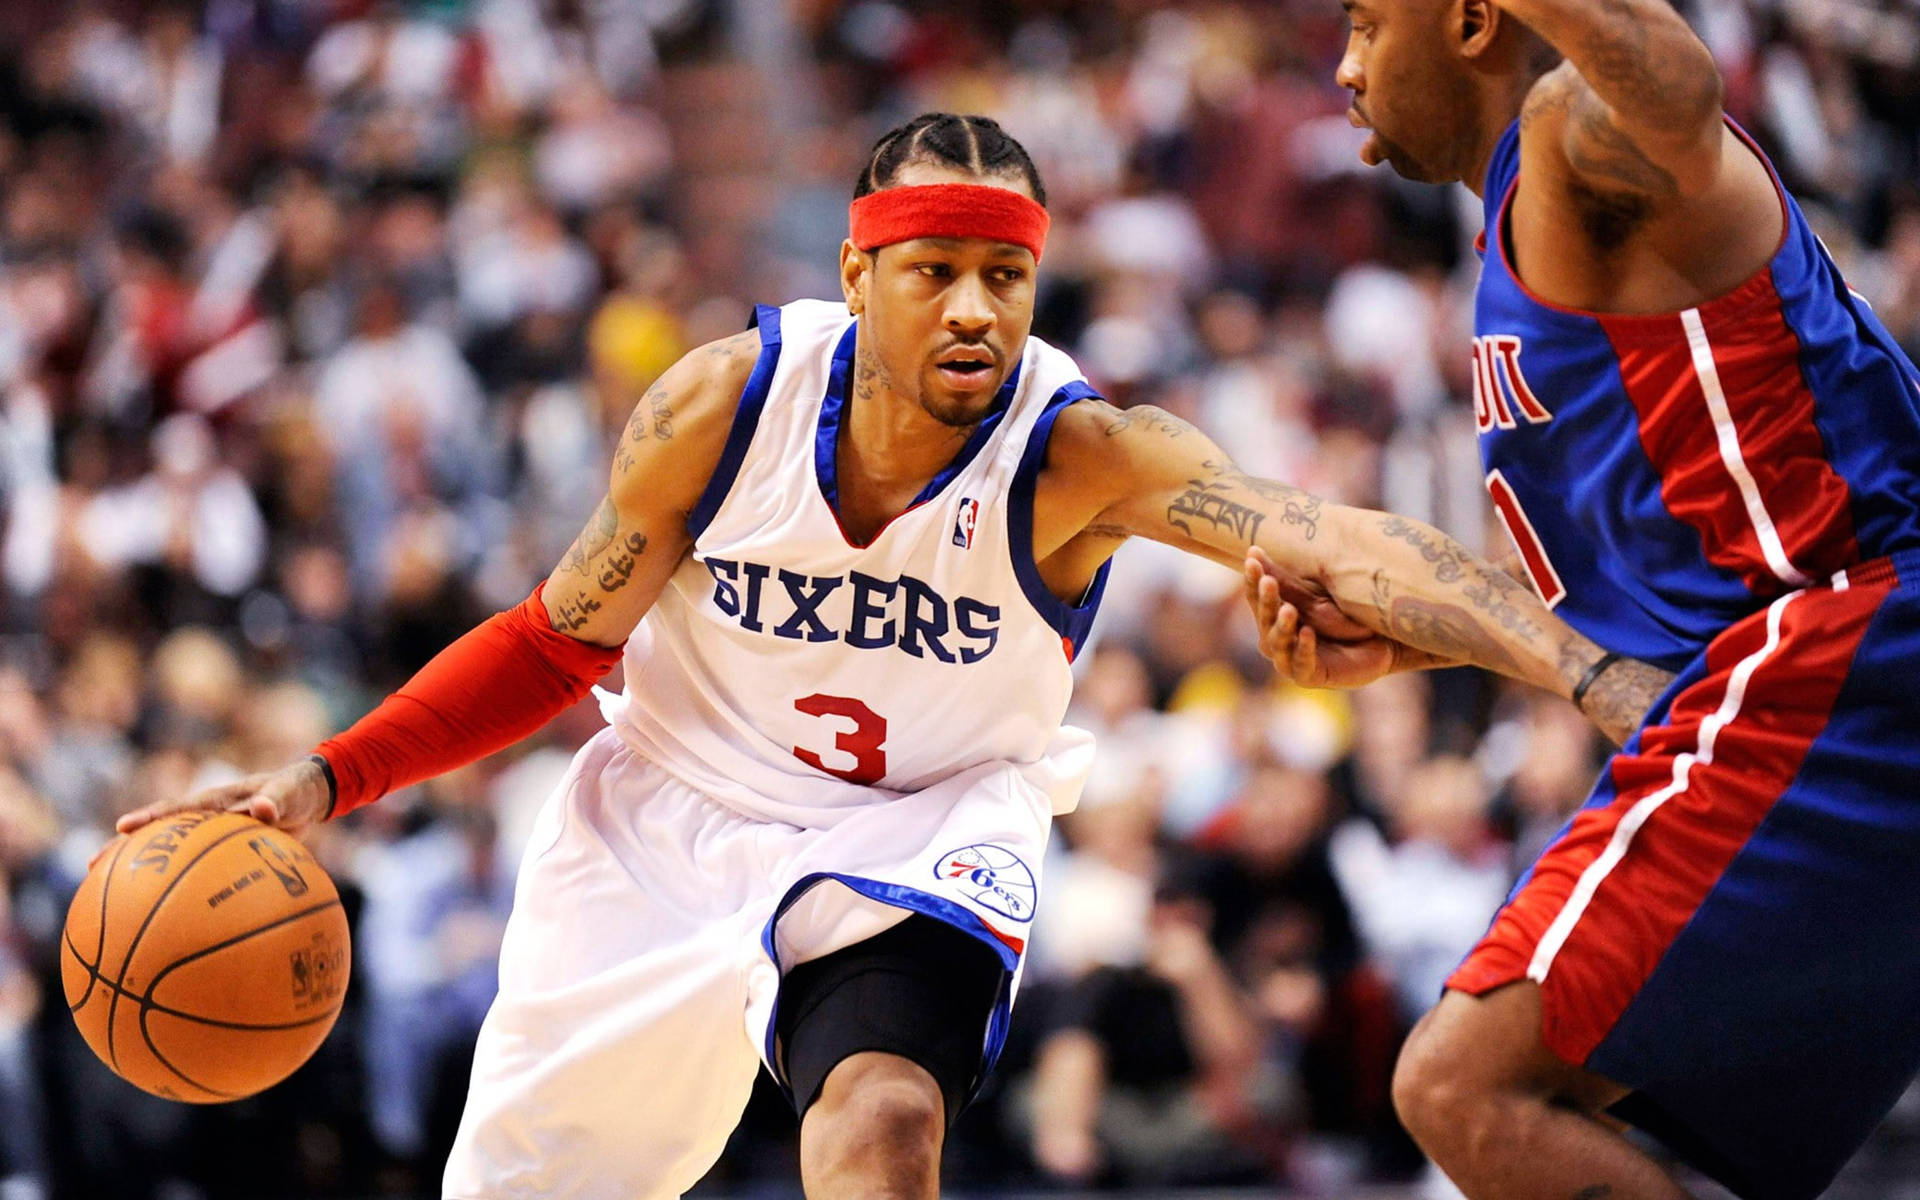 Sixers Iverson In Action Wallpaper